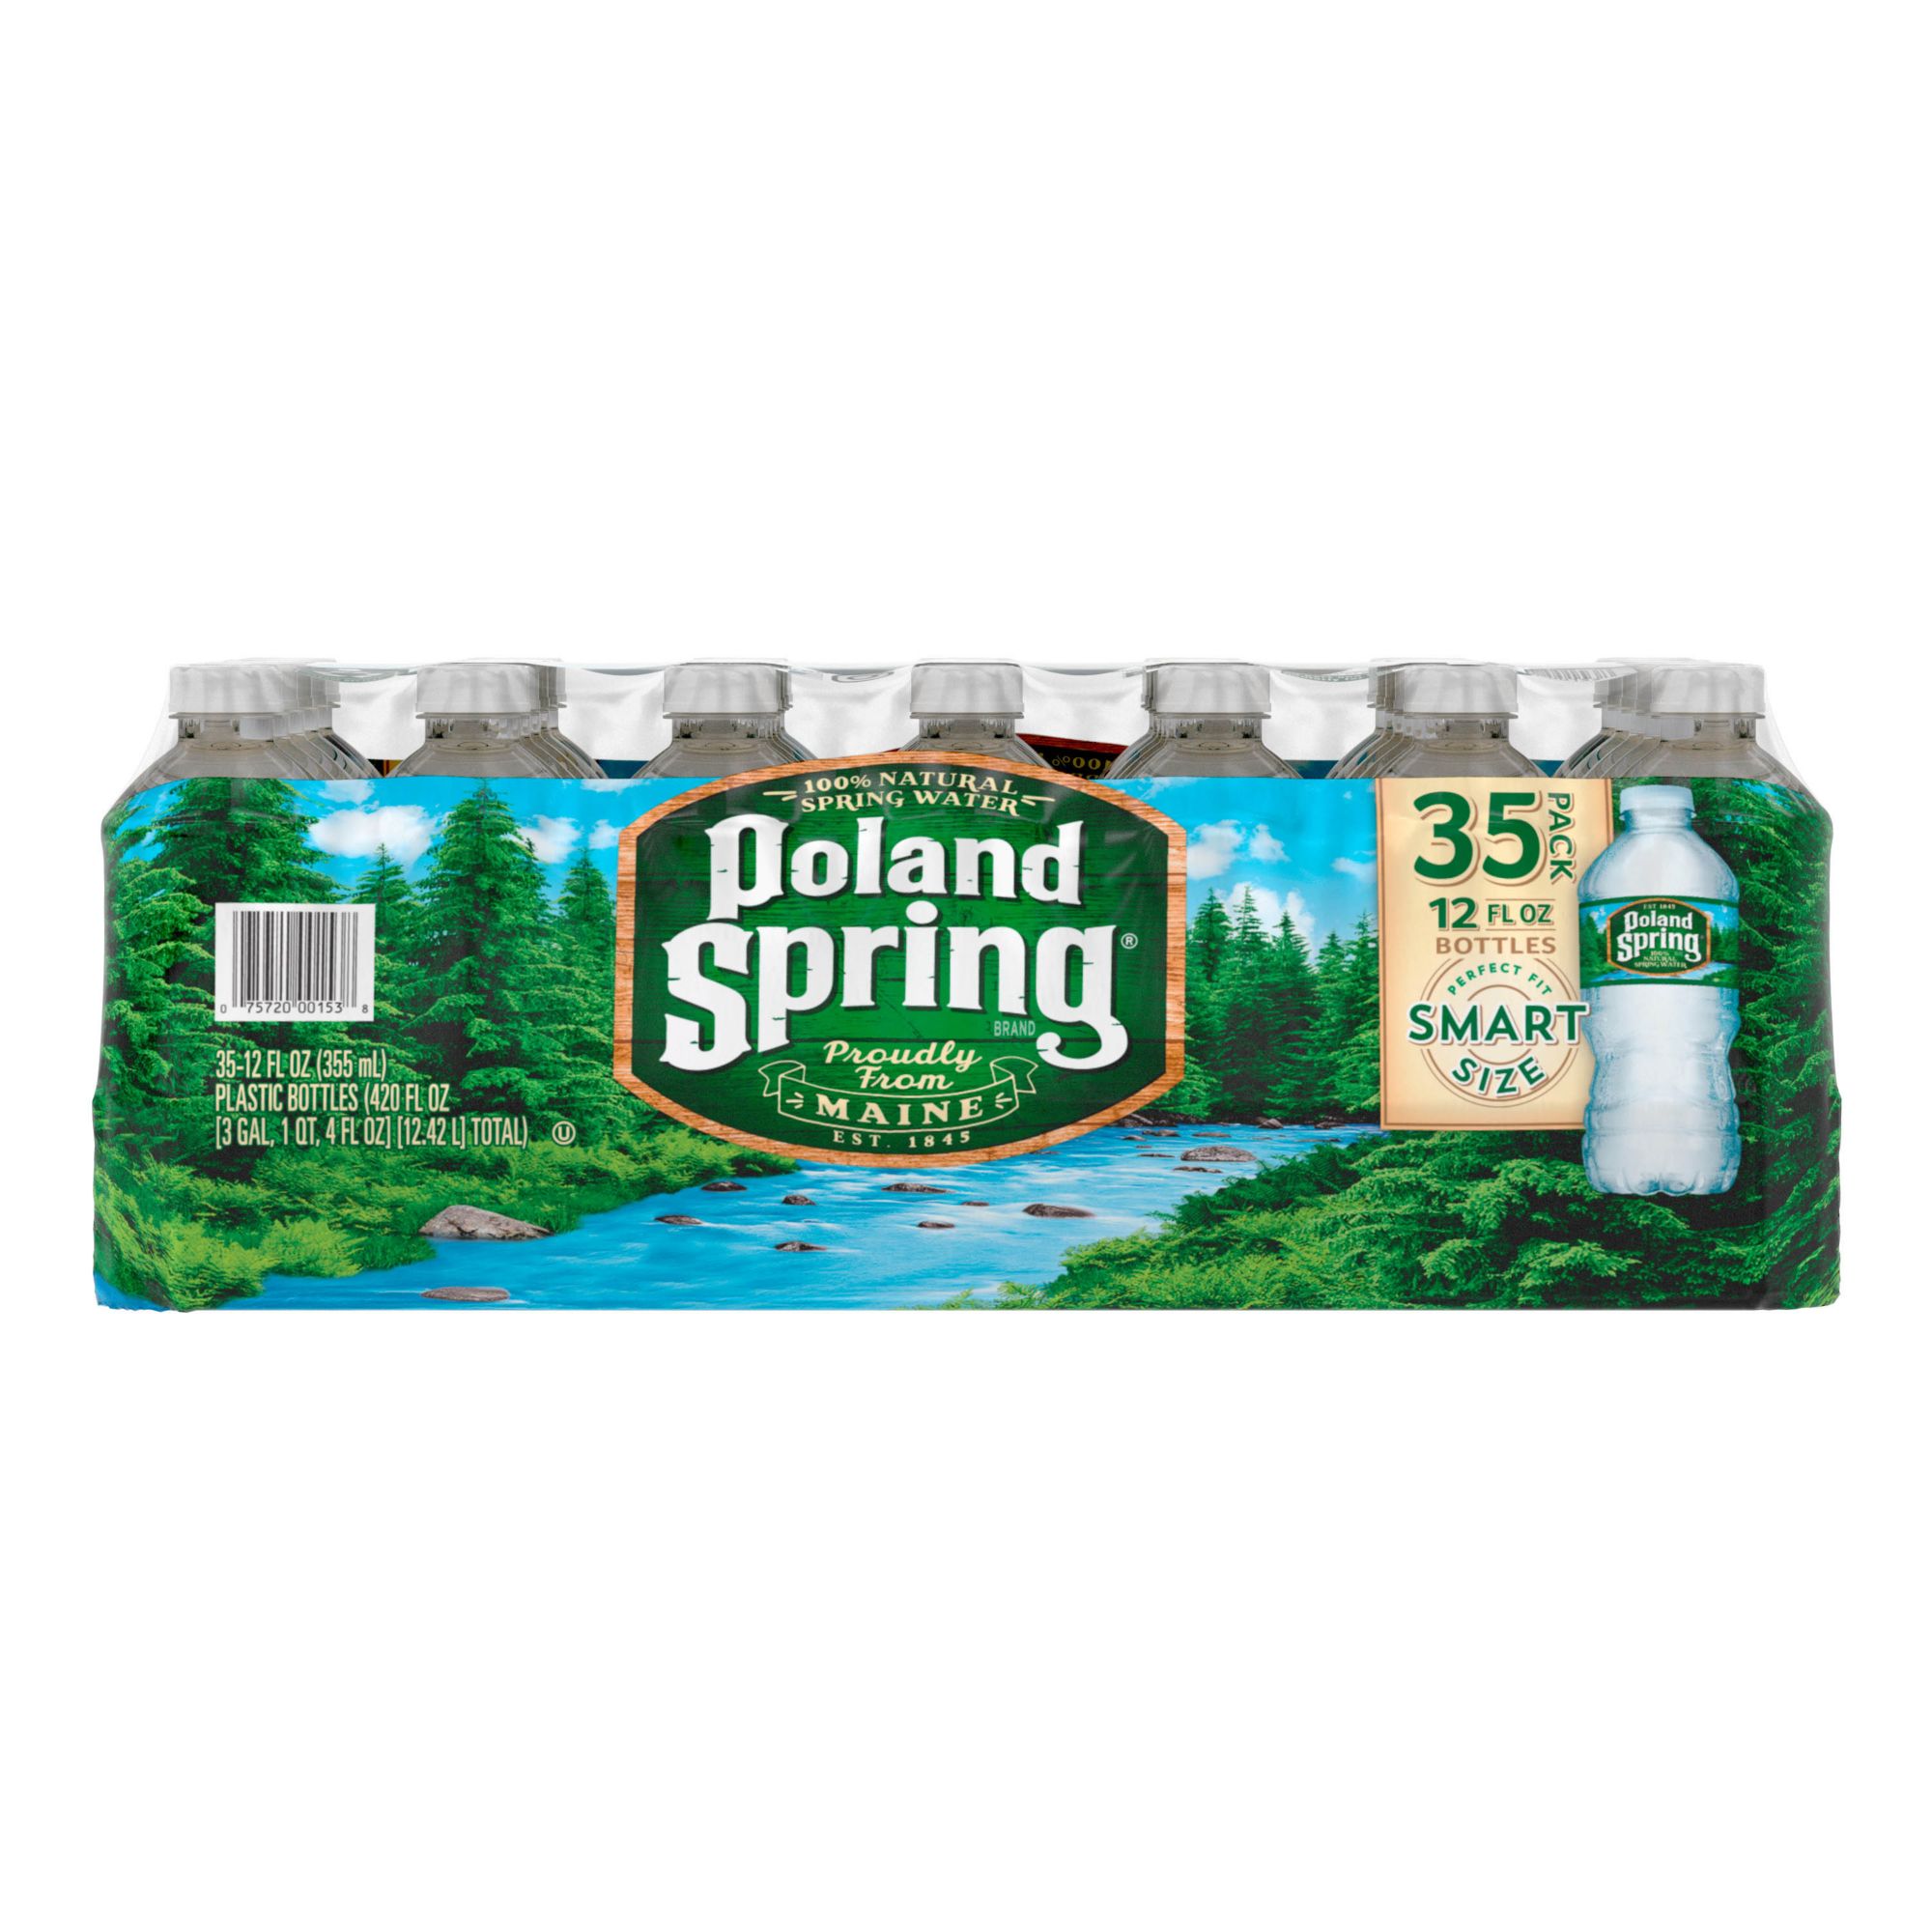 Poland Spring Natural Spring Water Clear Jugs (3 Liter)